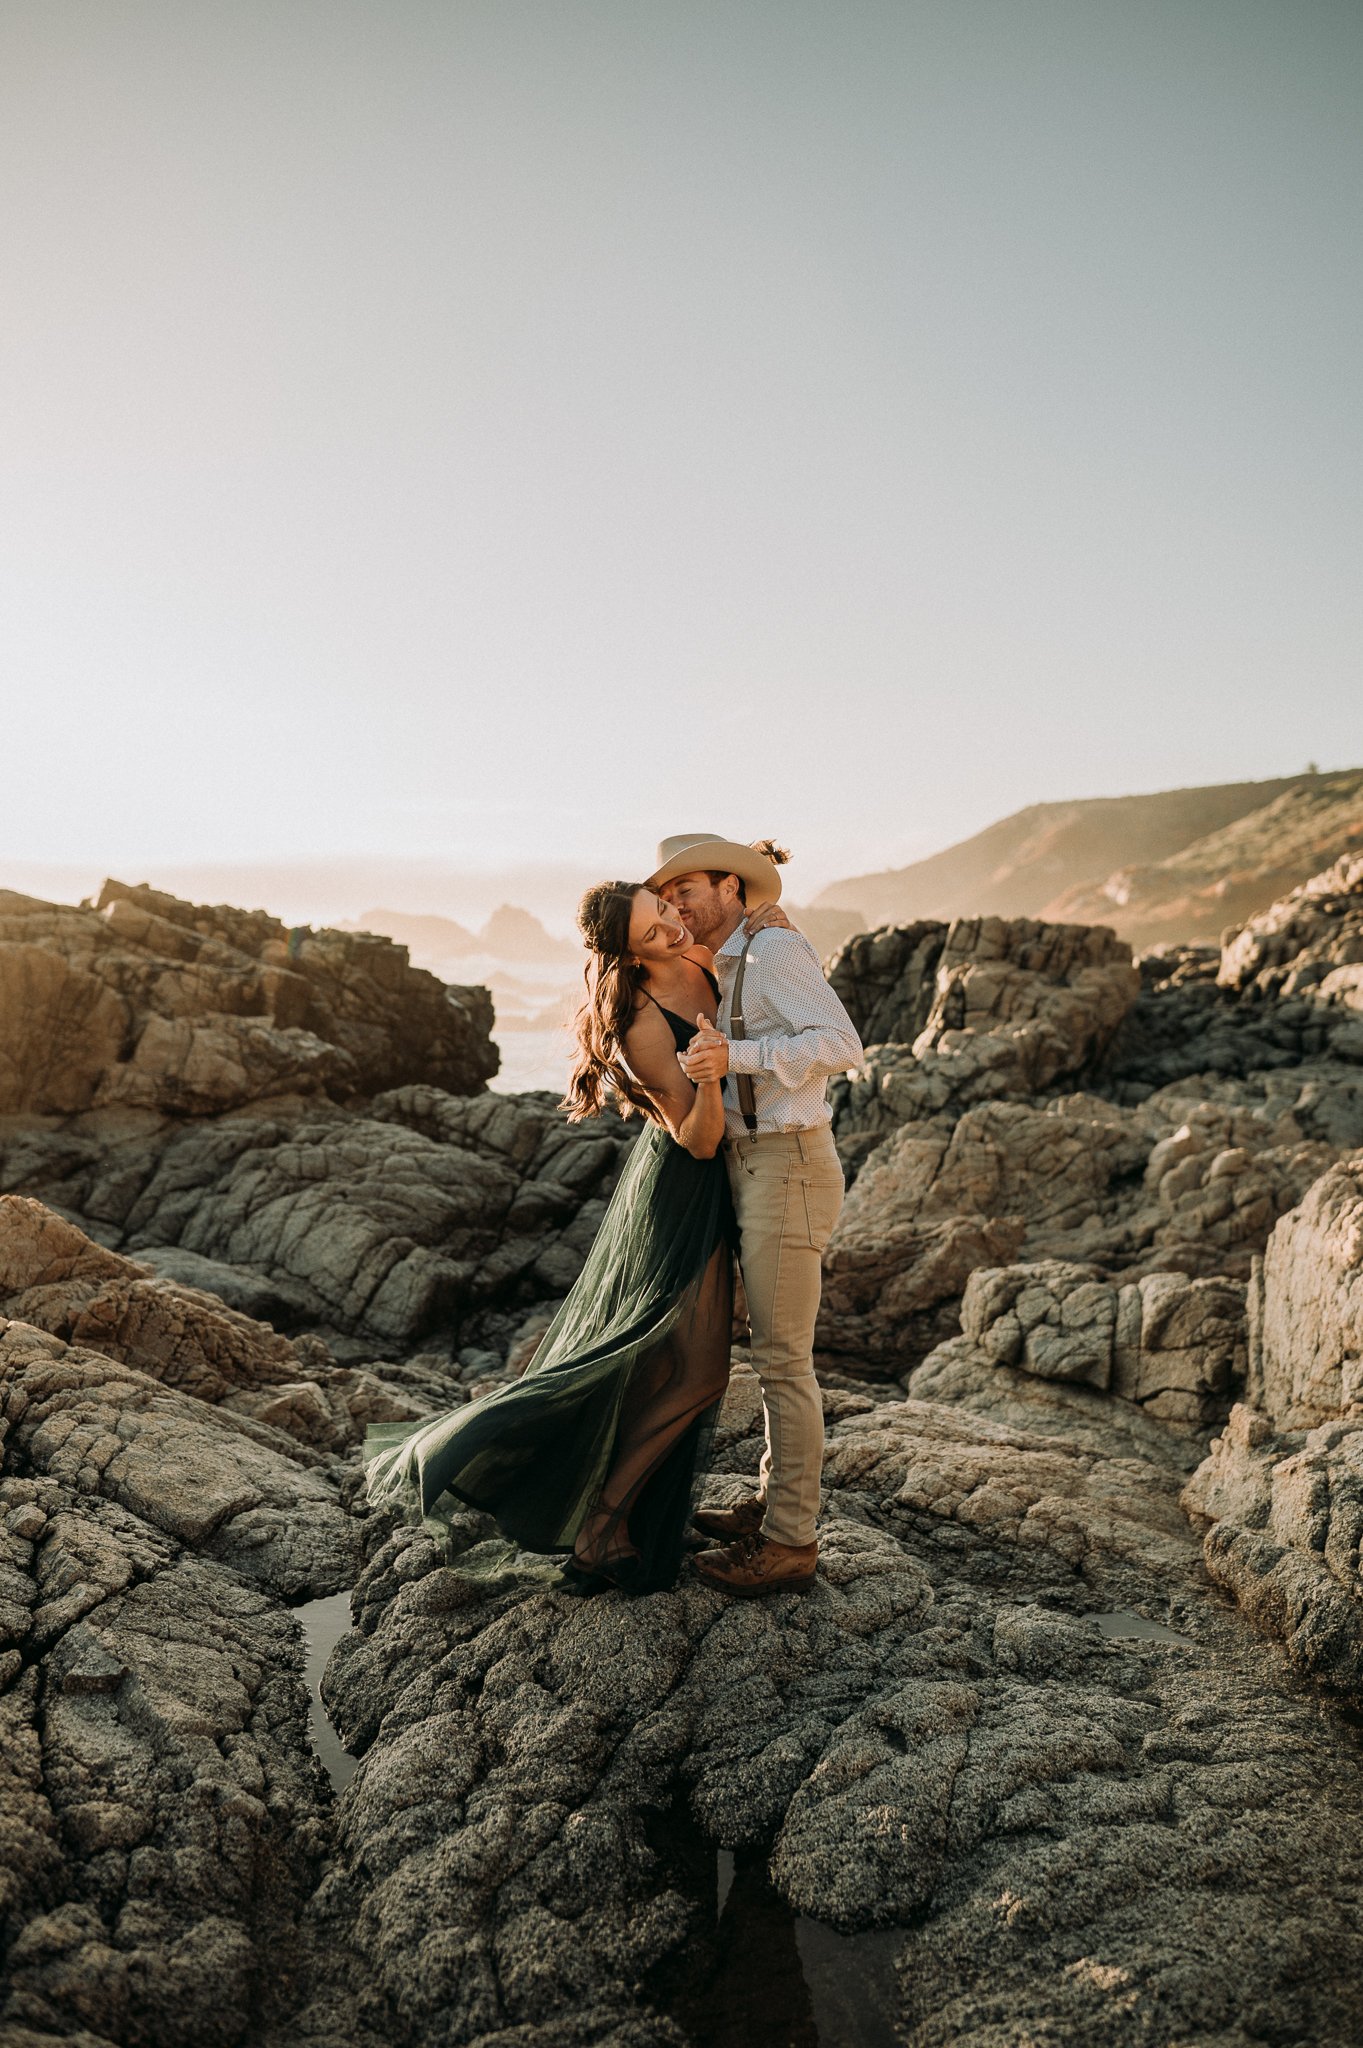 Newly engaged couple dancing cliffside in Big Sur California